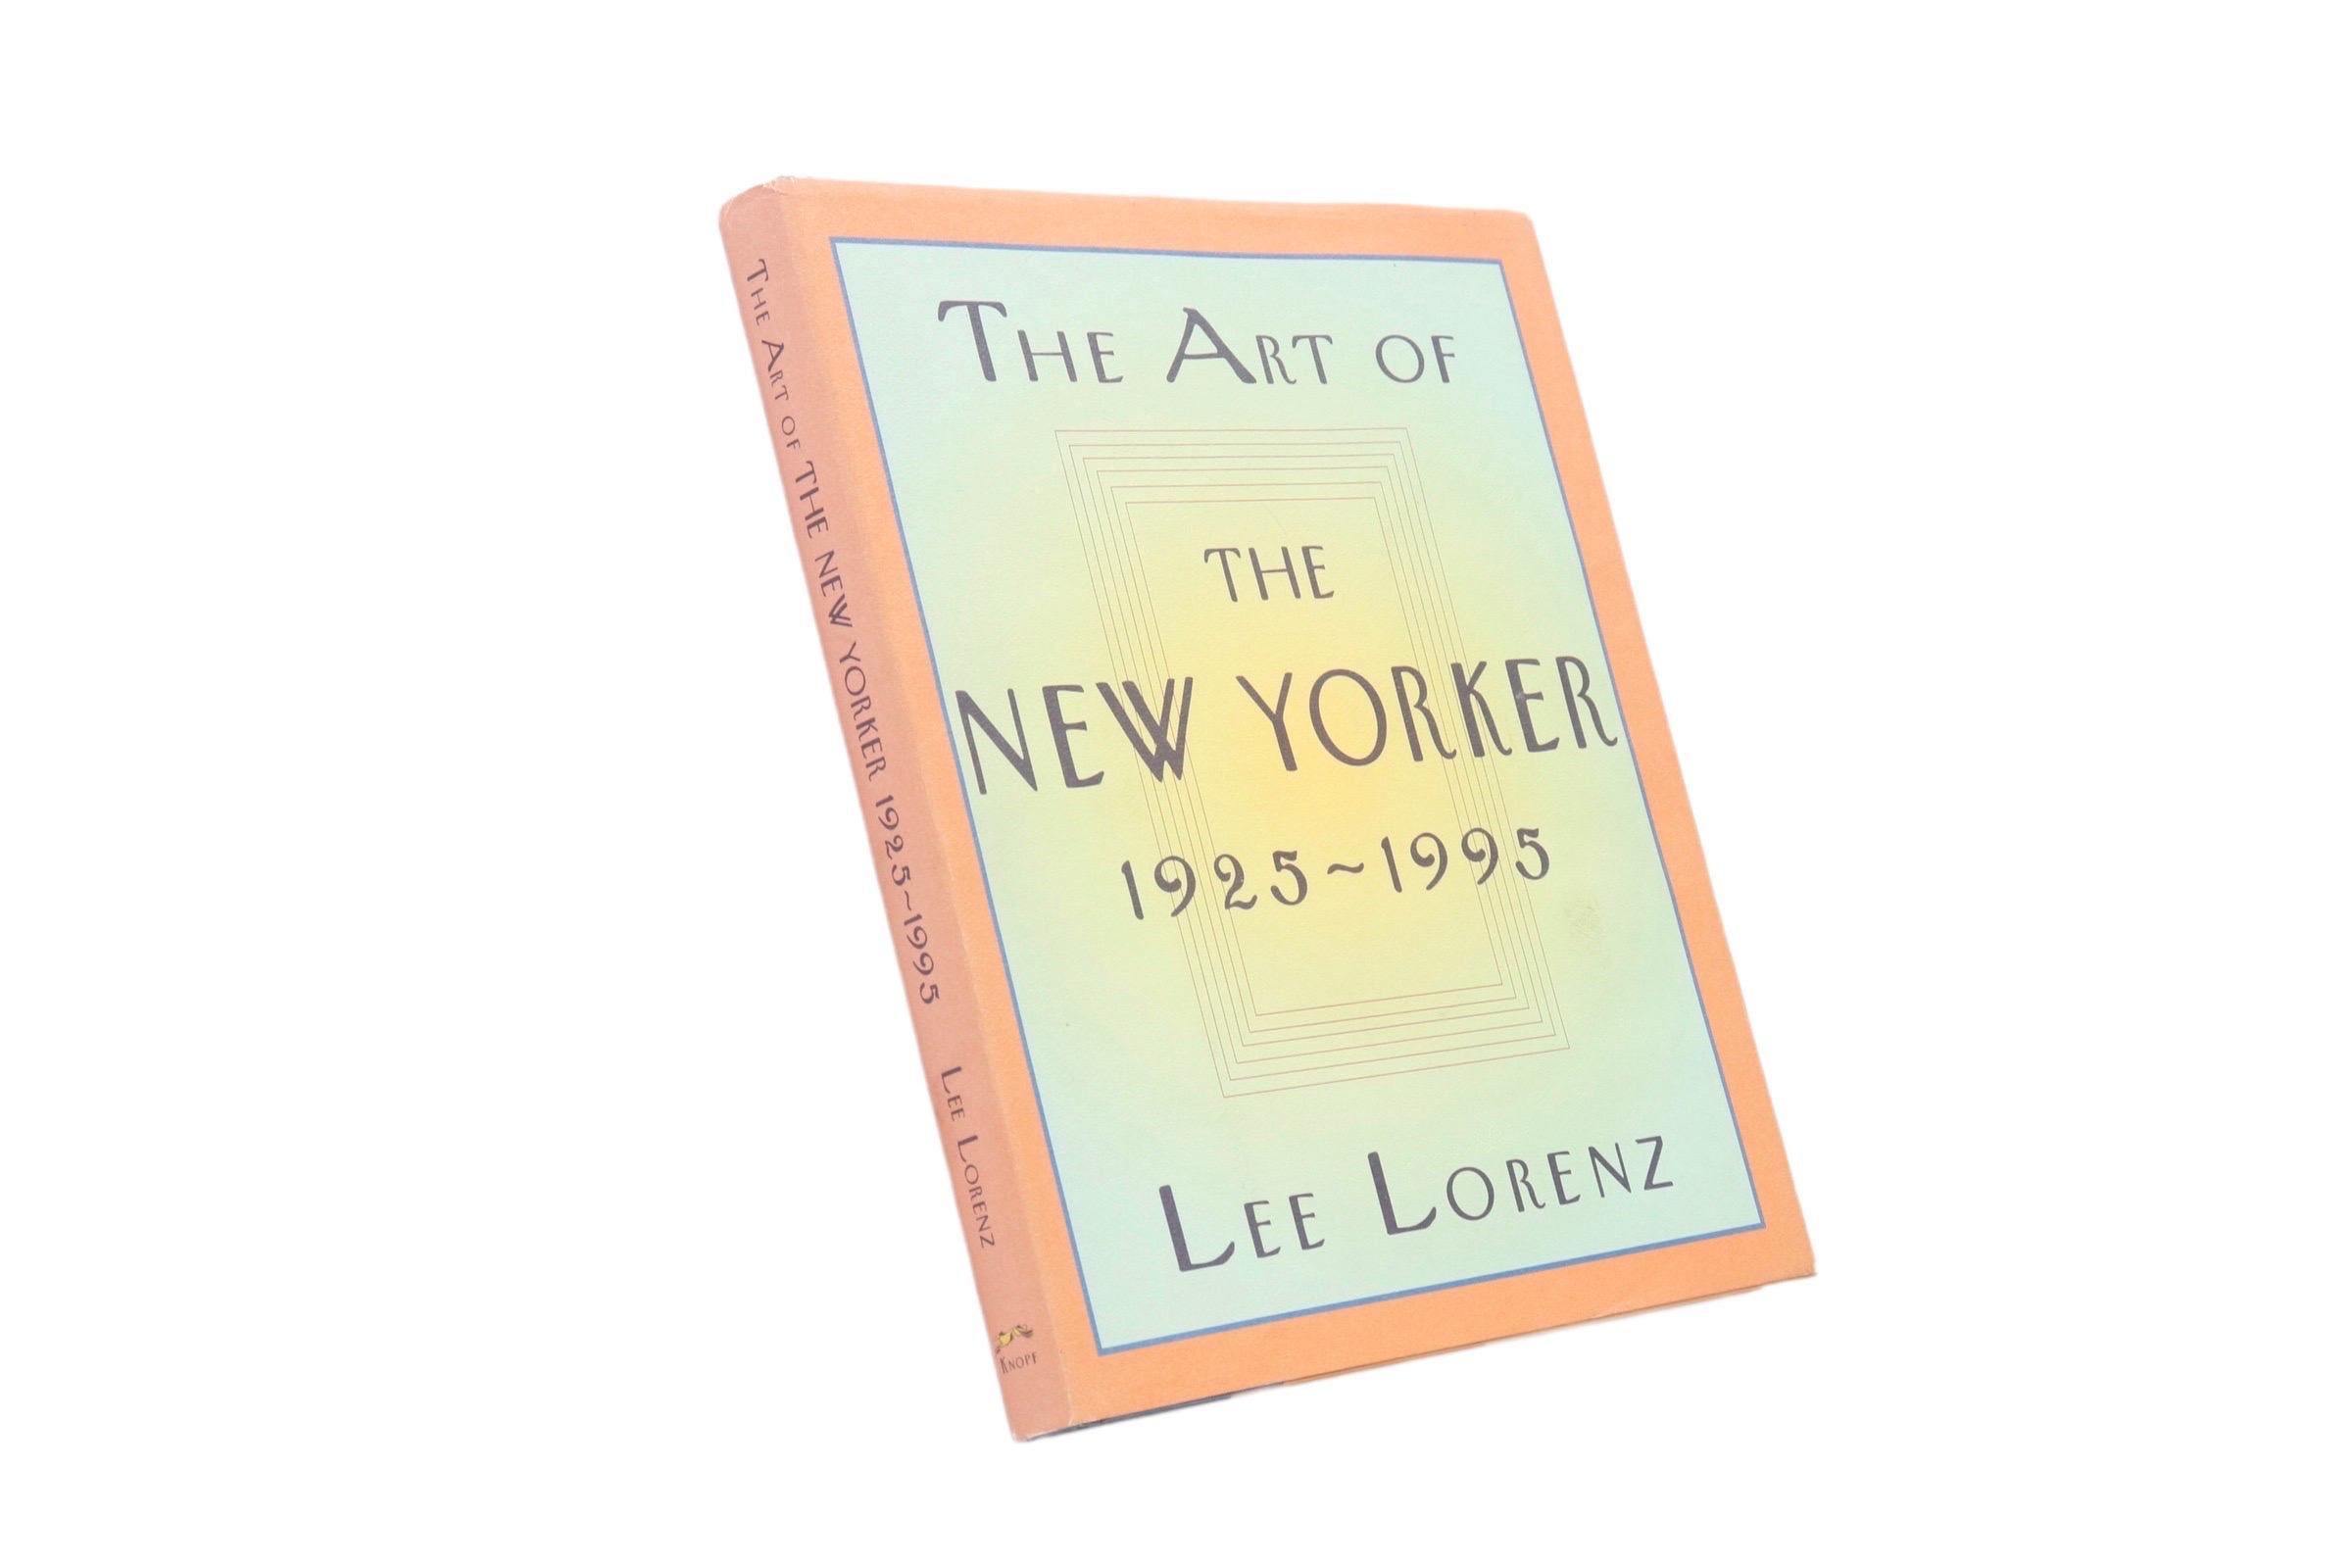 American The Art of the New Yorker 1925-1995 by Lee Lorenz For Sale